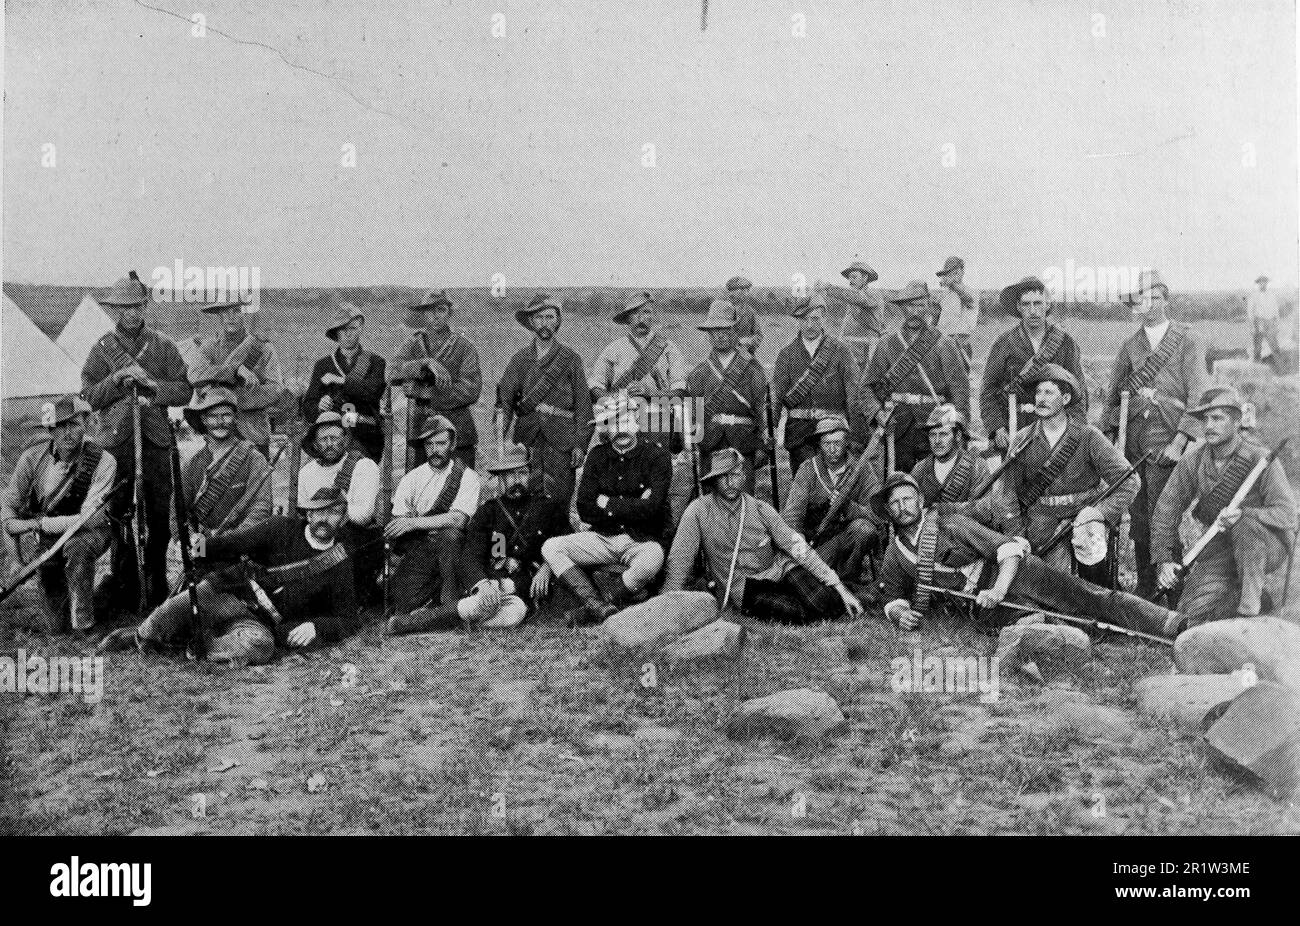 The Boer War, also known as the Second Boer War, The South African War ...